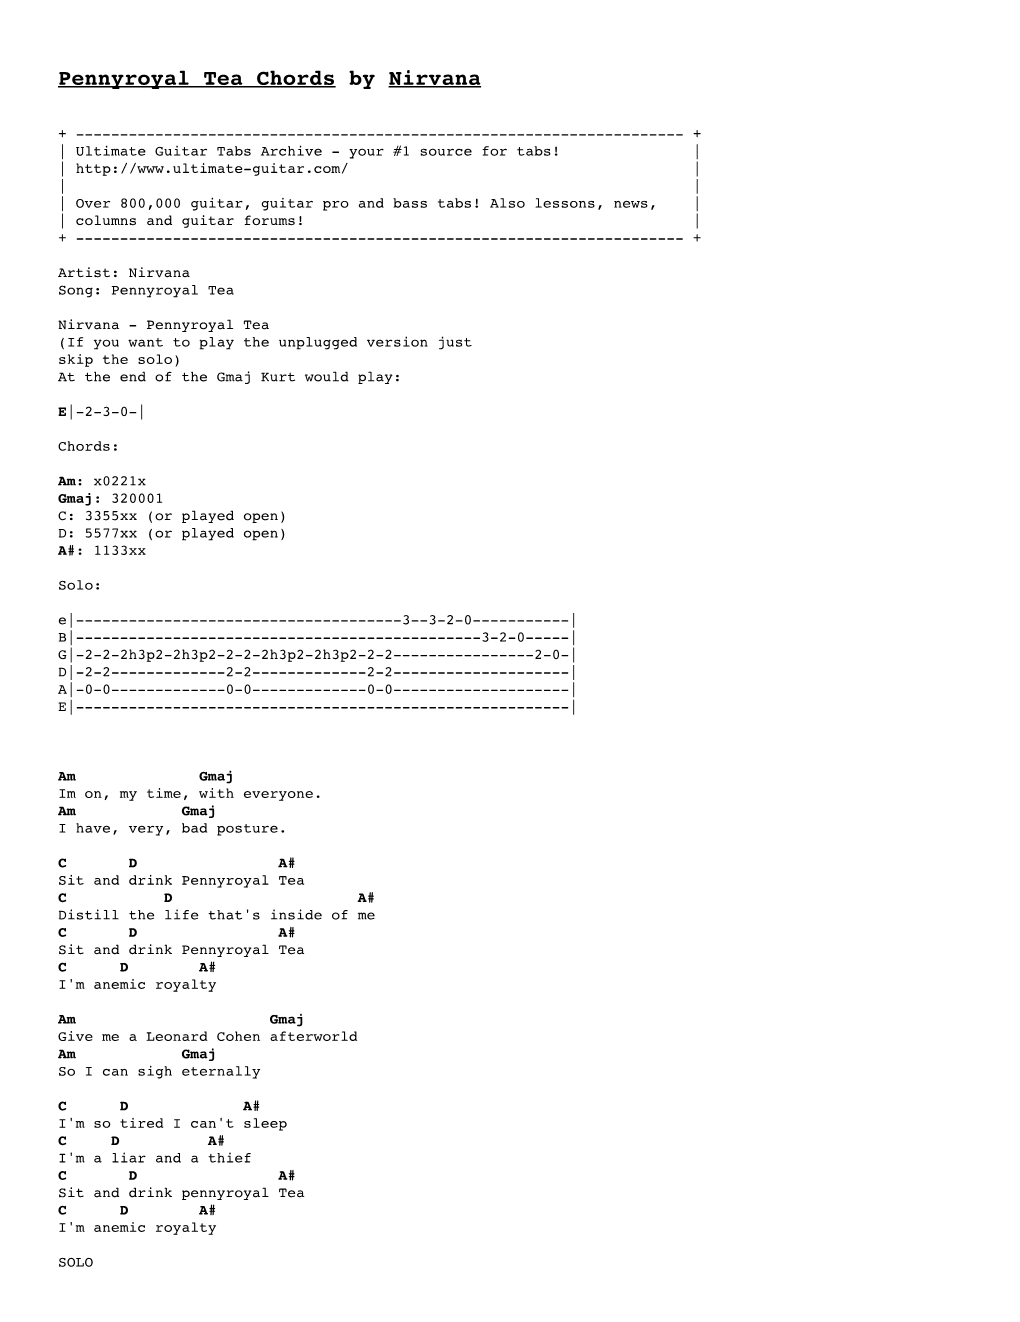 Pennyroyal Tea Chords by Nirvana Tabs @ Ultimate Guitar Archive